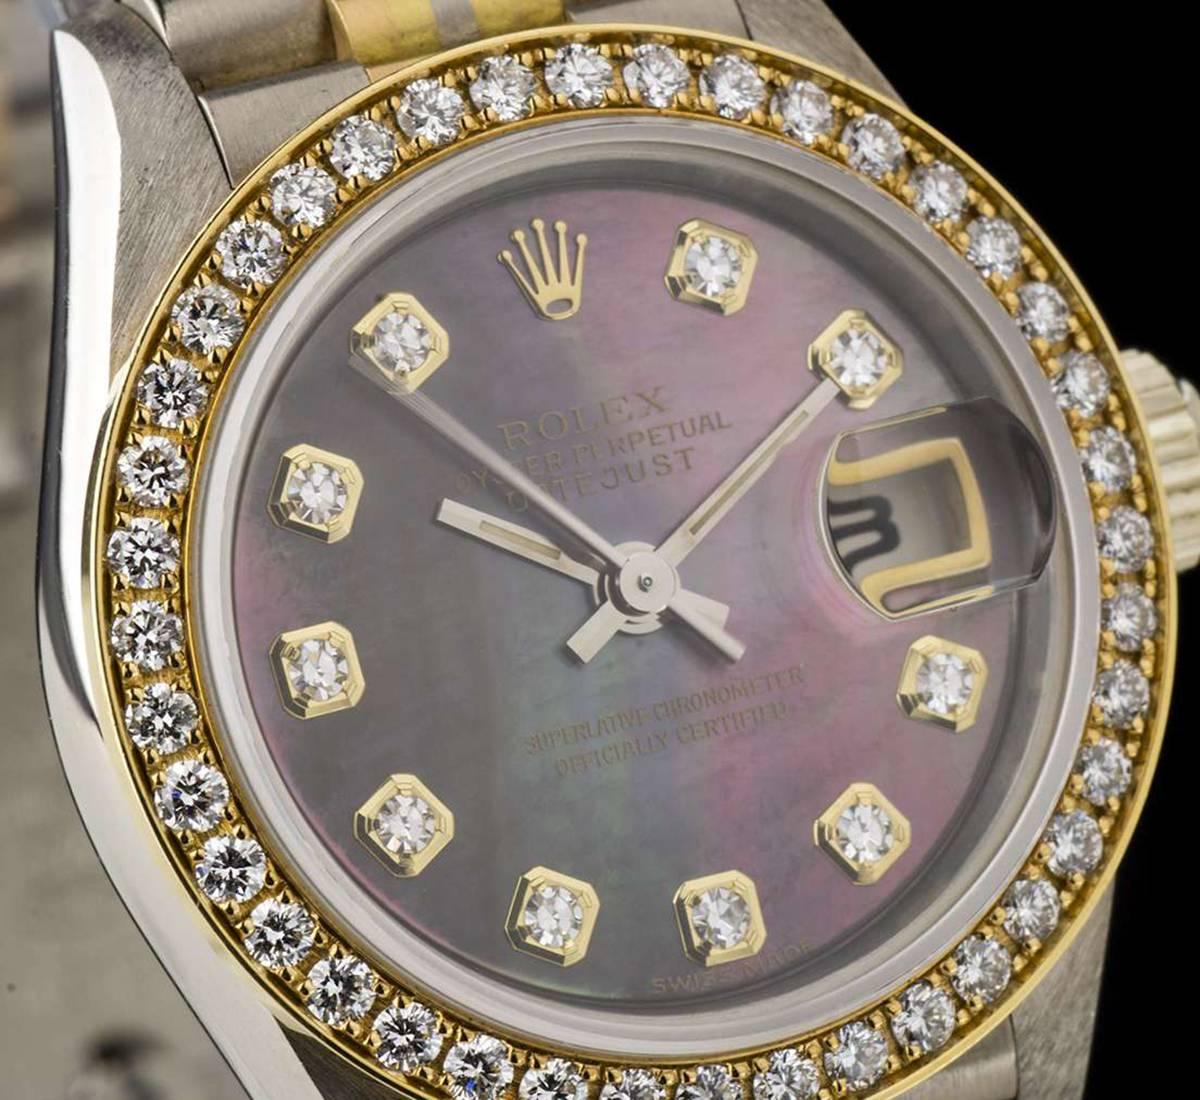 An Unworn Tridor Oyster Perpetual Datejust Ladies NOS Wristwatch, black mother of pearl dial with 10 applied round brilliant cut diamond hour markers, date at 3 0'clock, a fixed yellow gold bezel set with approximately 40 round brilliant cut